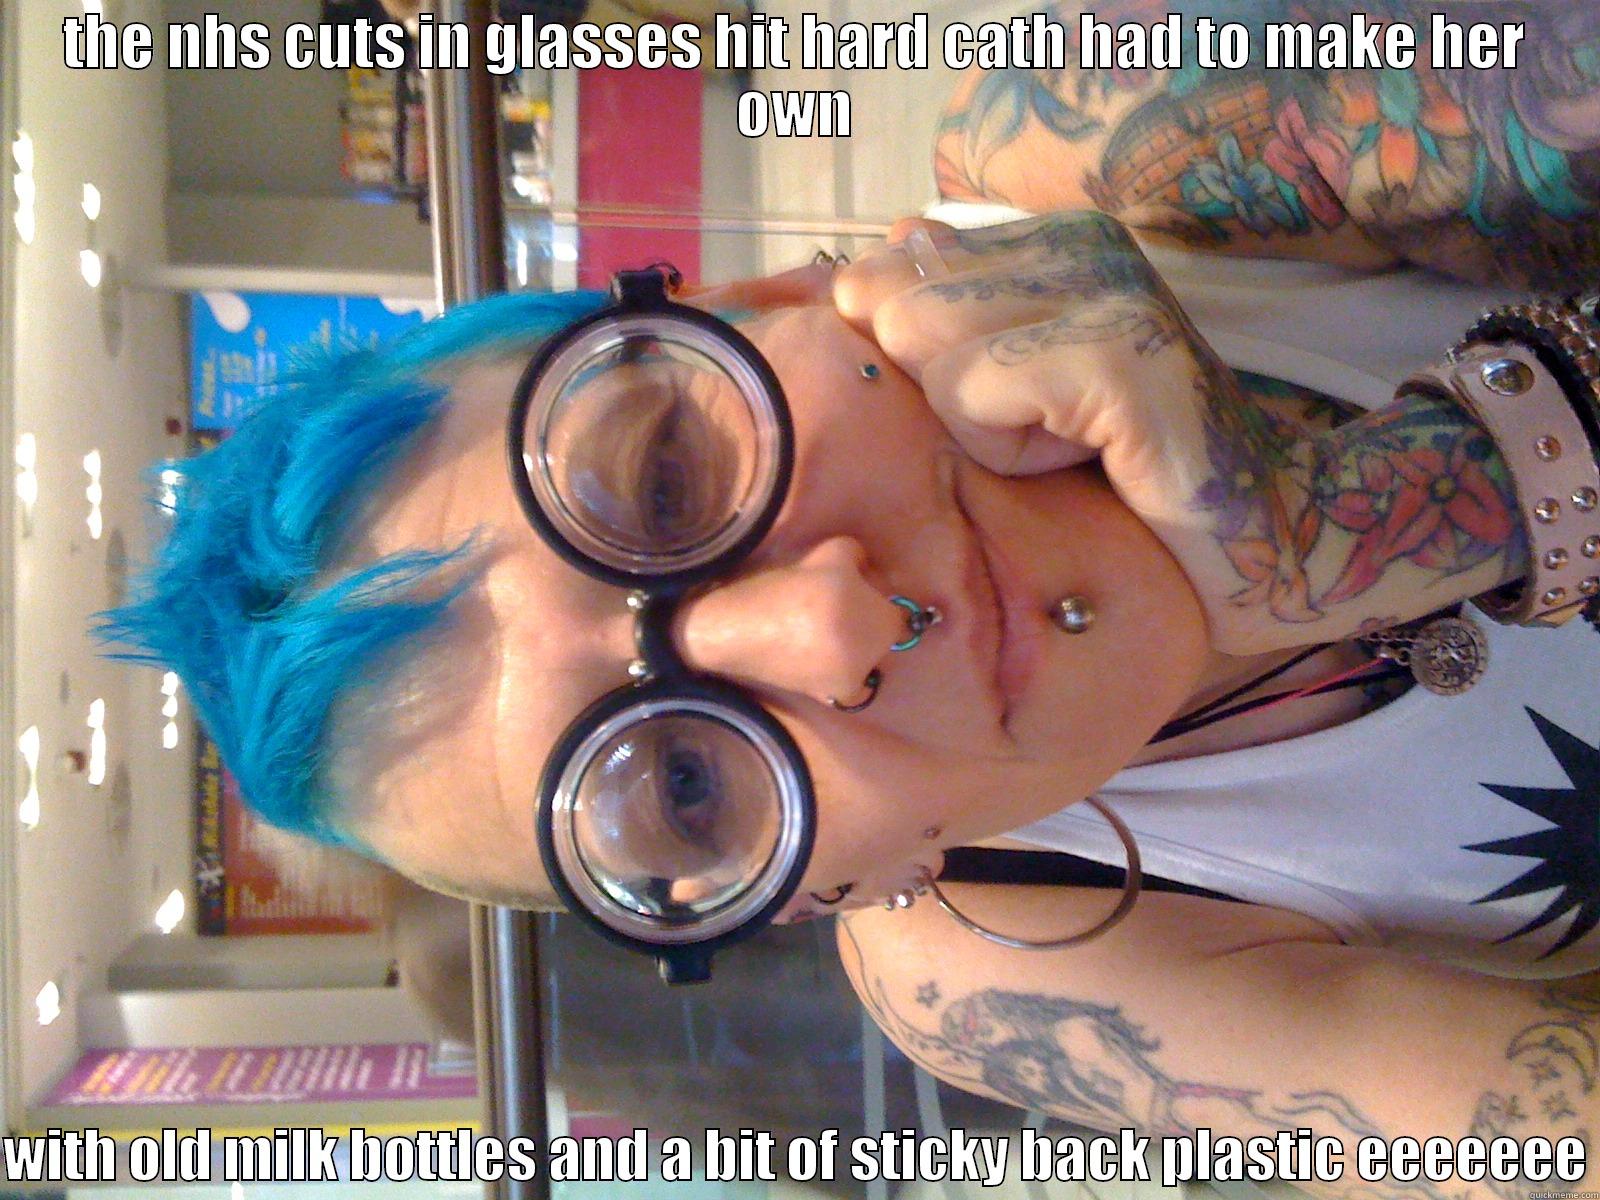 glasesddffgf sssssssssdddff - THE NHS CUTS IN GLASSES HIT HARD CATH HAD TO MAKE HER OWN  WITH OLD MILK BOTTLES AND A BIT OF STICKY BACK PLASTIC EEEEEEE Misc